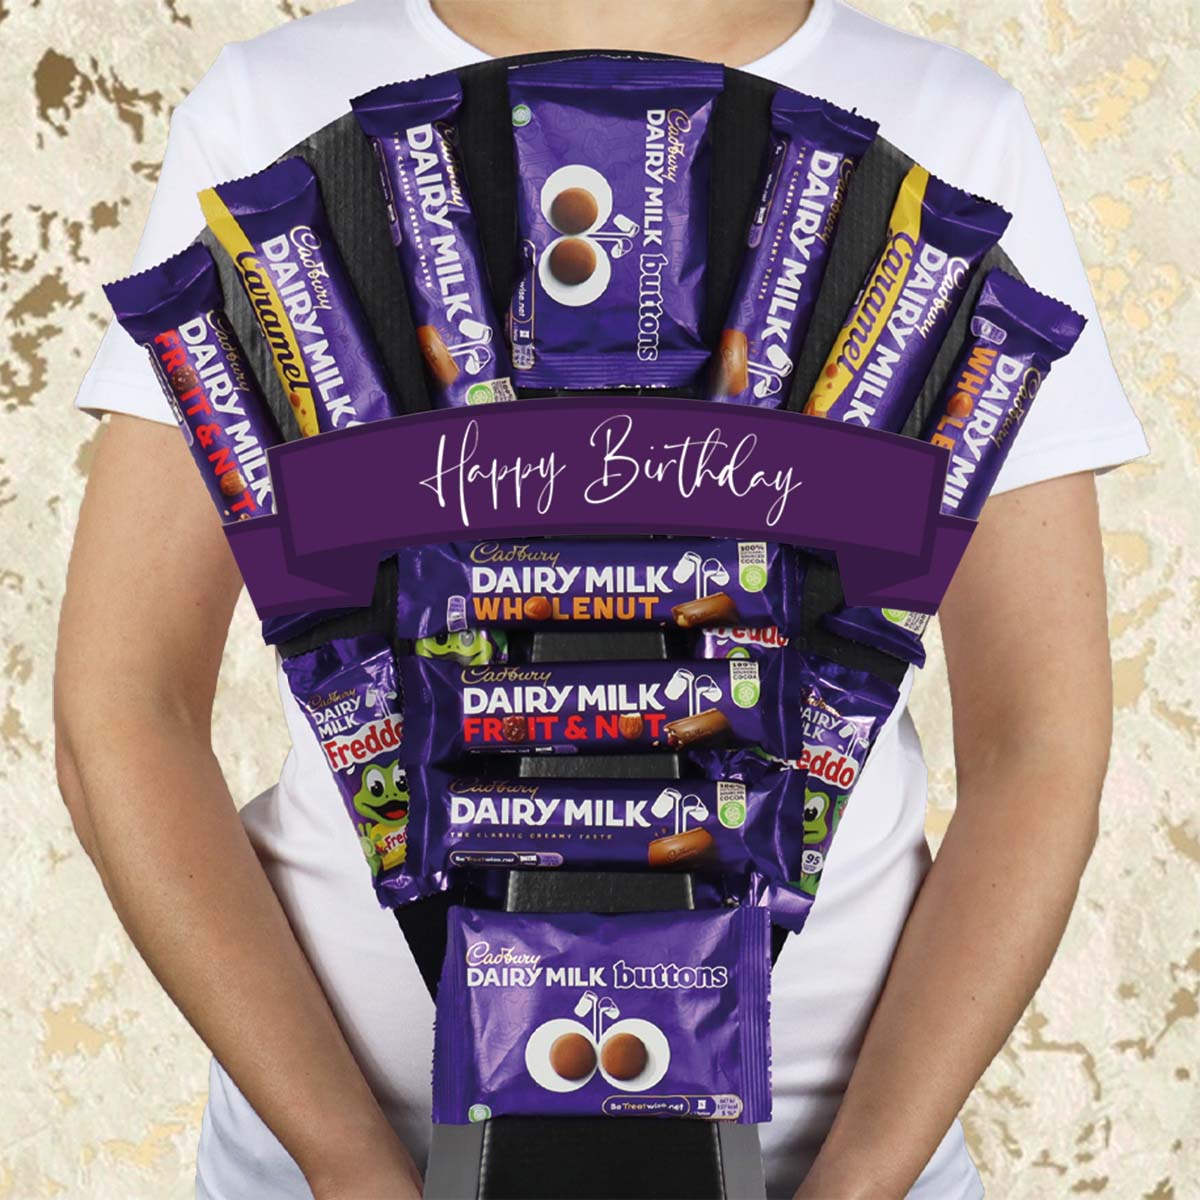 Large Dairy Milk Selection Happy Birthday Chocolate Bouquet With Buttons, Whole Nut, Caramel, Fruit & Nut & More - Gift Hamper Box by HamperWell